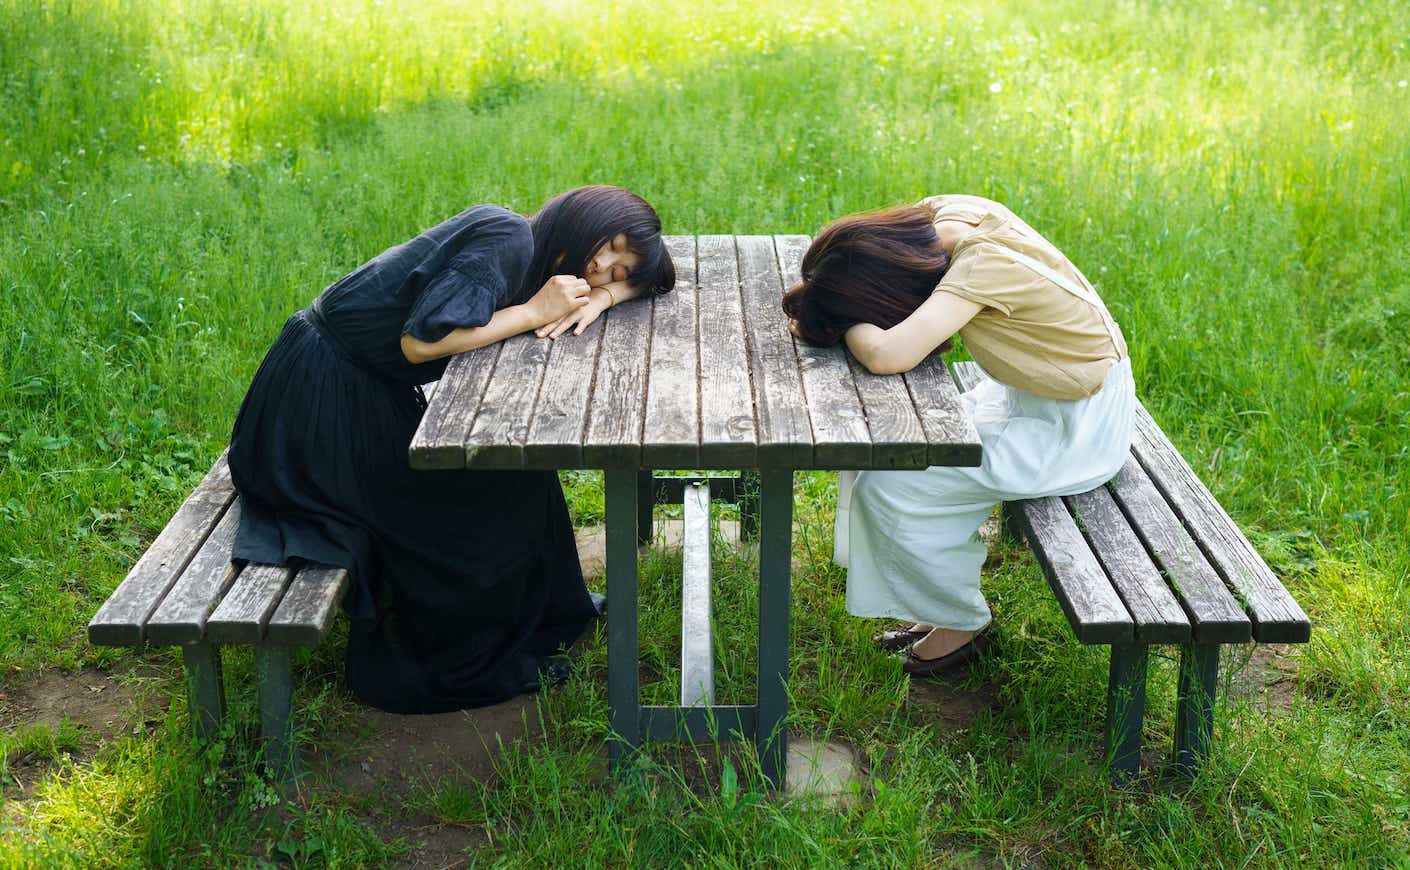 Two women sleeping in the park